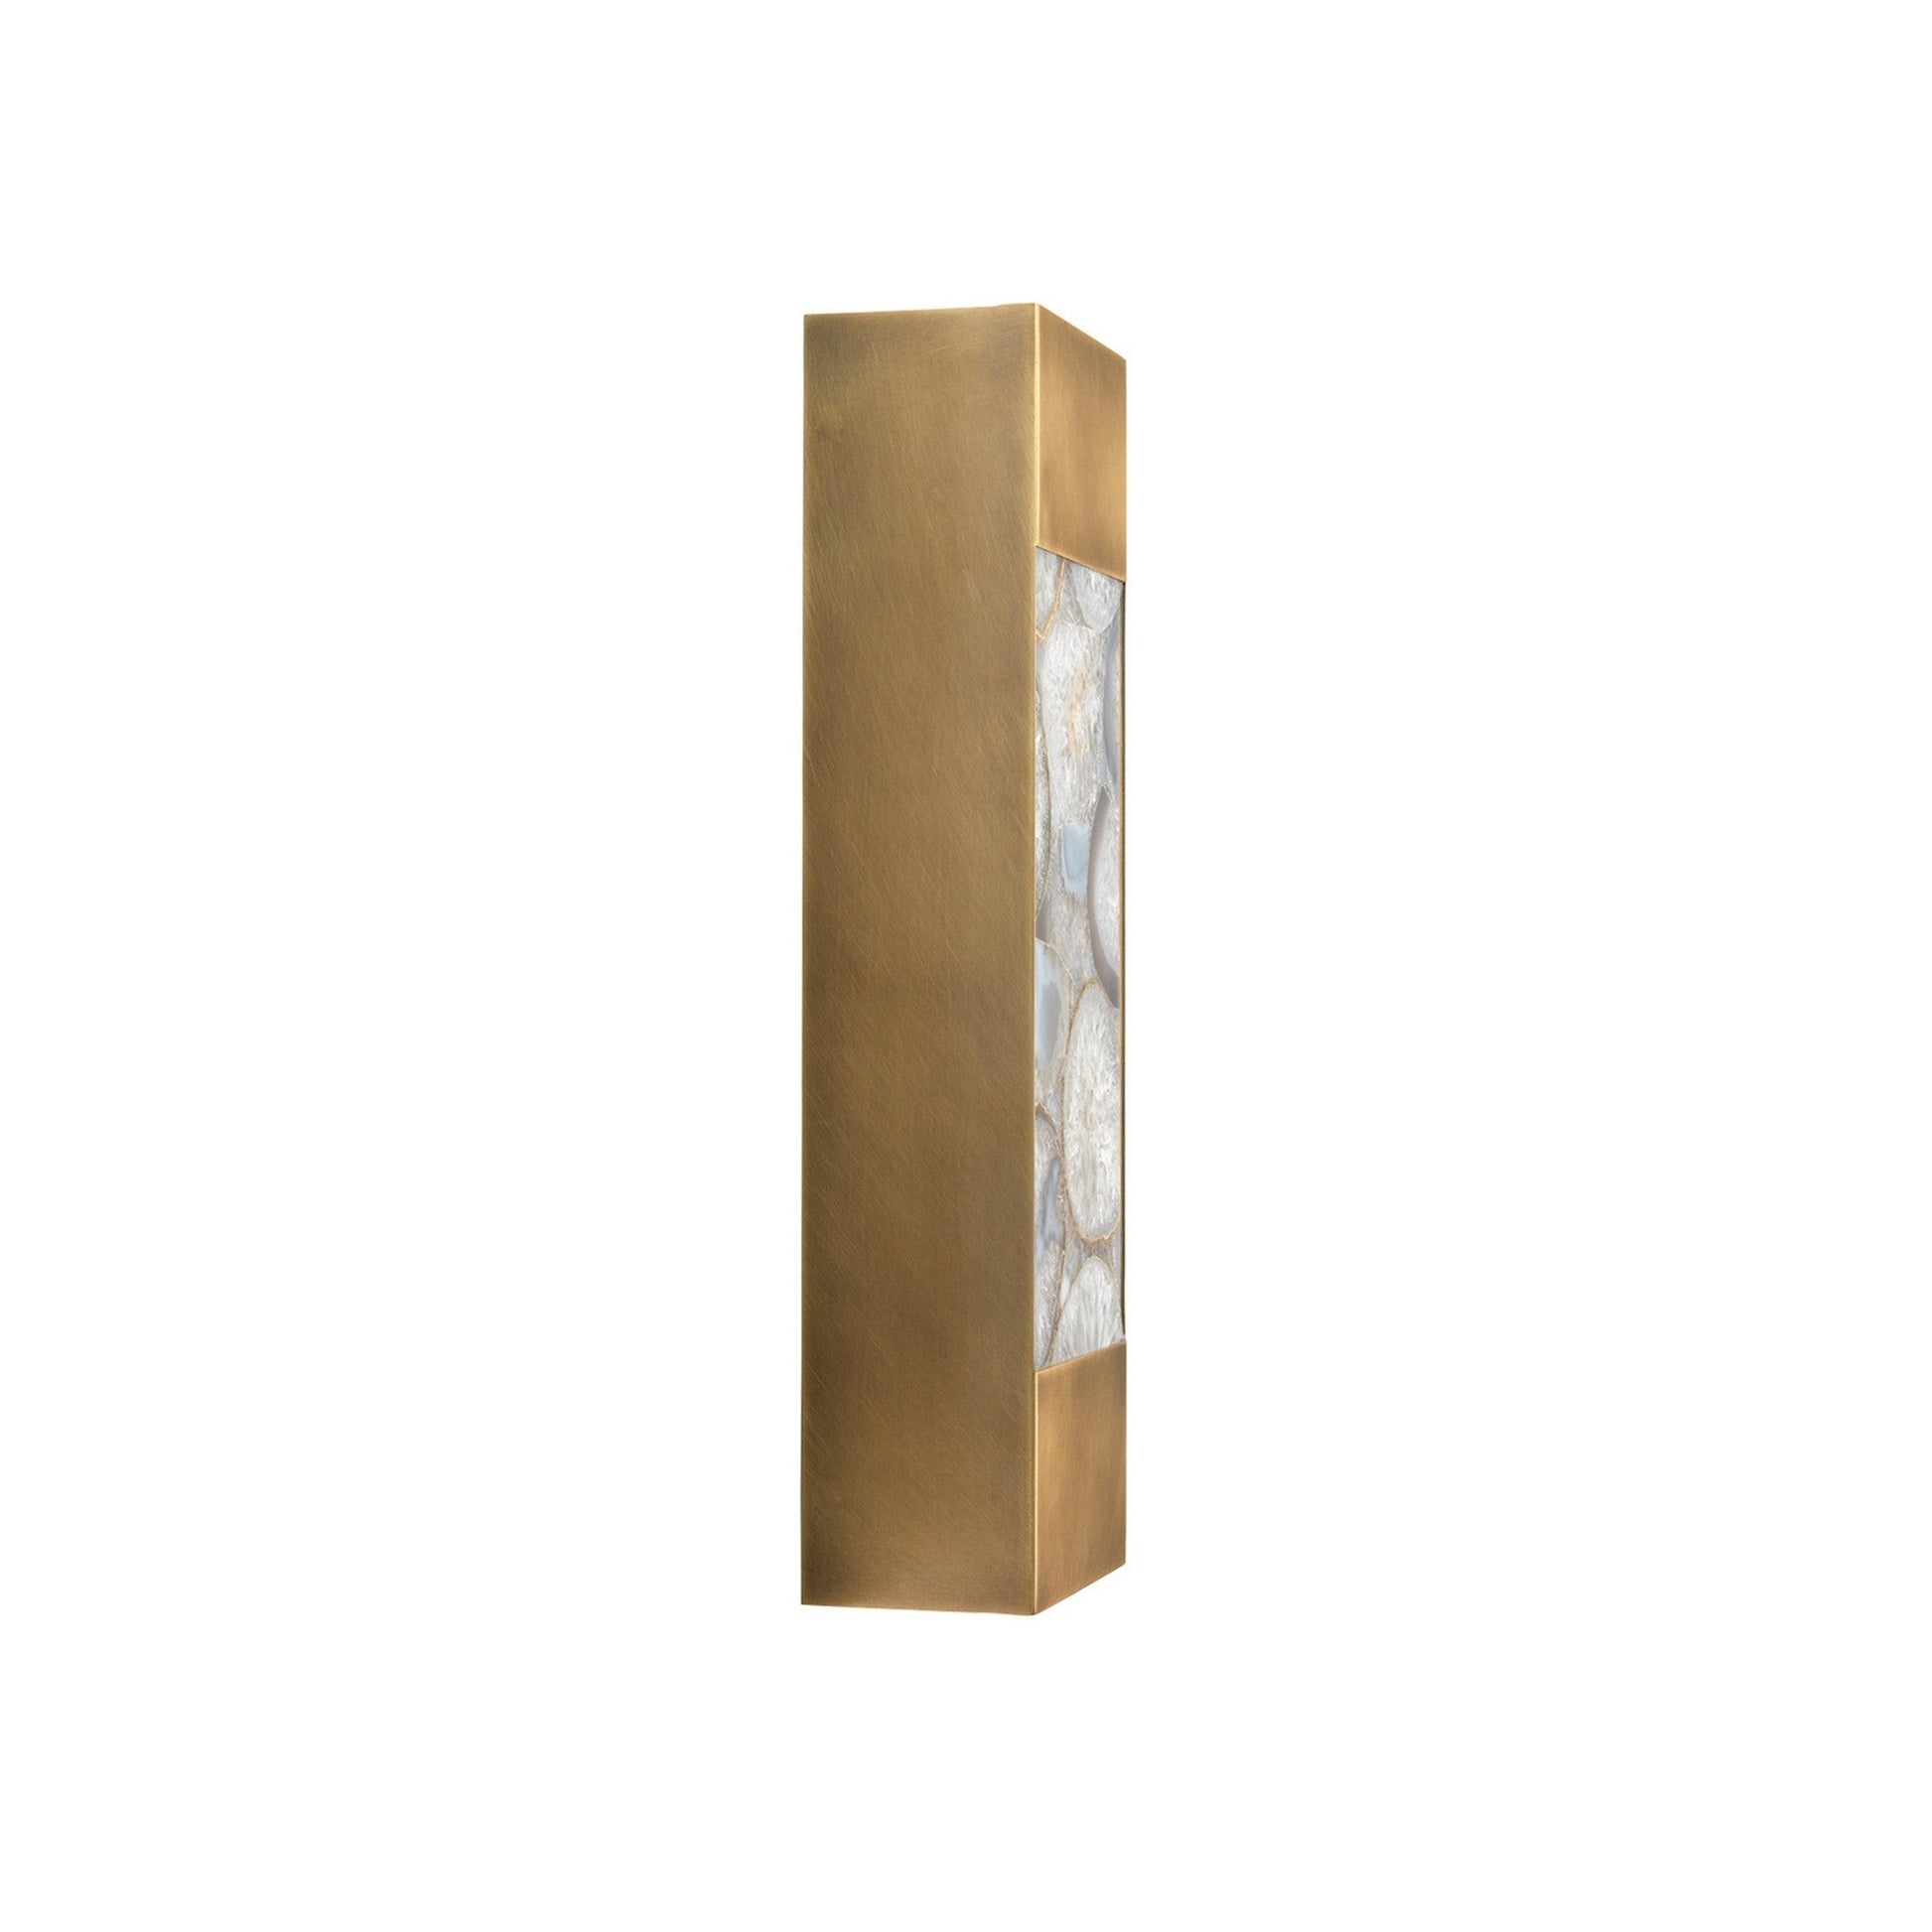 Jamie Young Leopold 6" x 19" 2-Light Rectangular Agate Resin and Antique Brass Wall Sconce